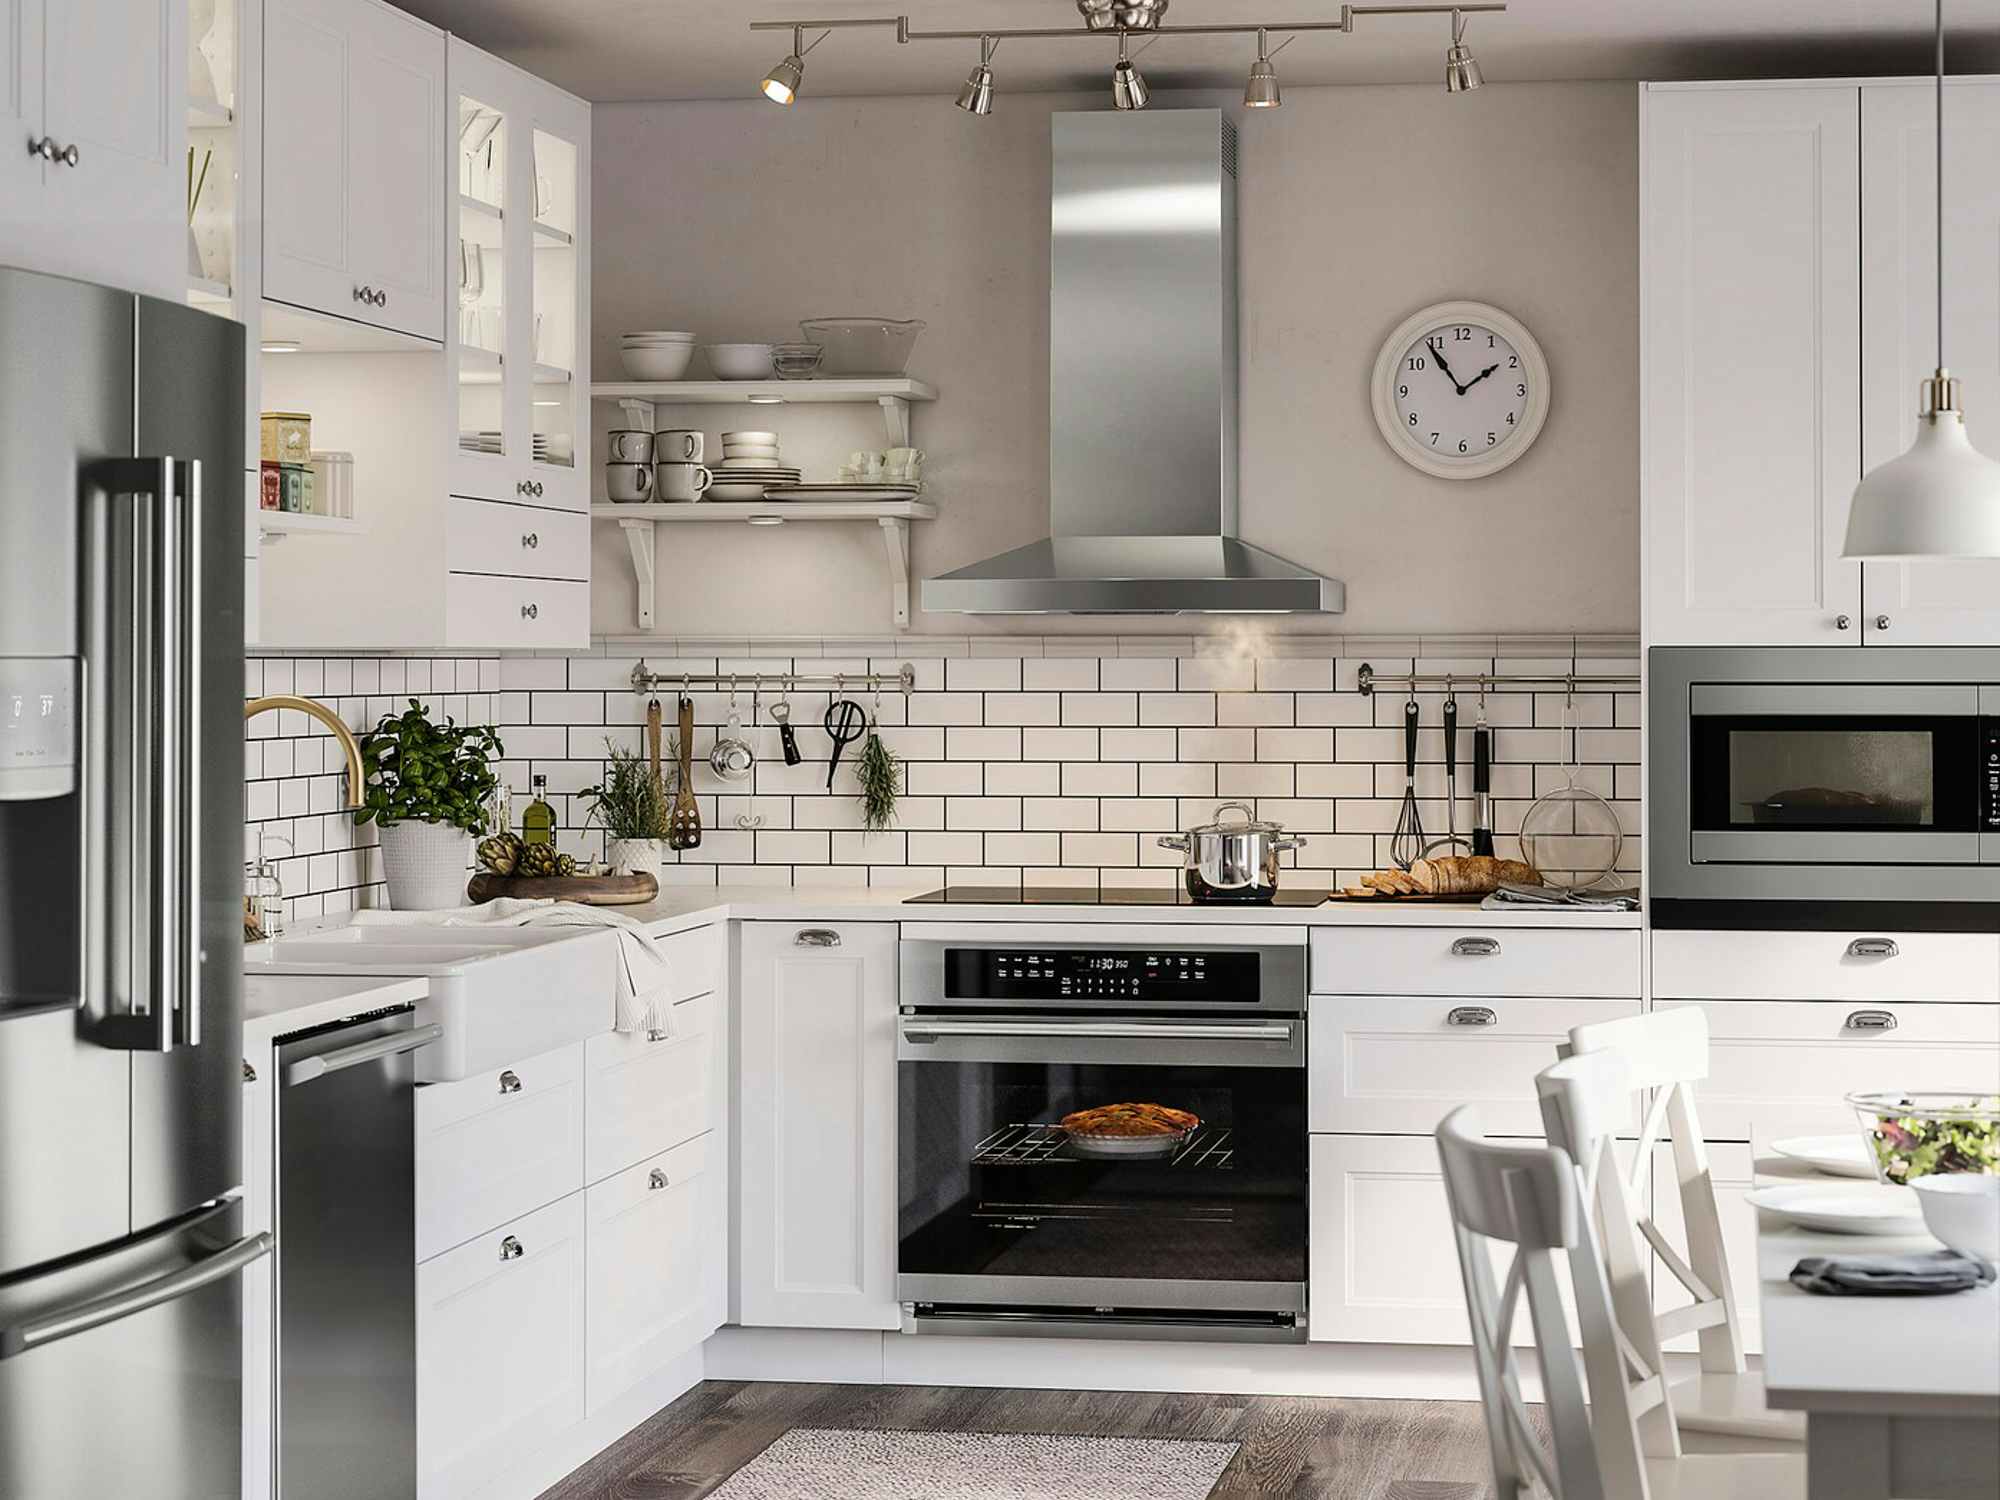 A kitchen with a wall-mounted range hood from IKEA